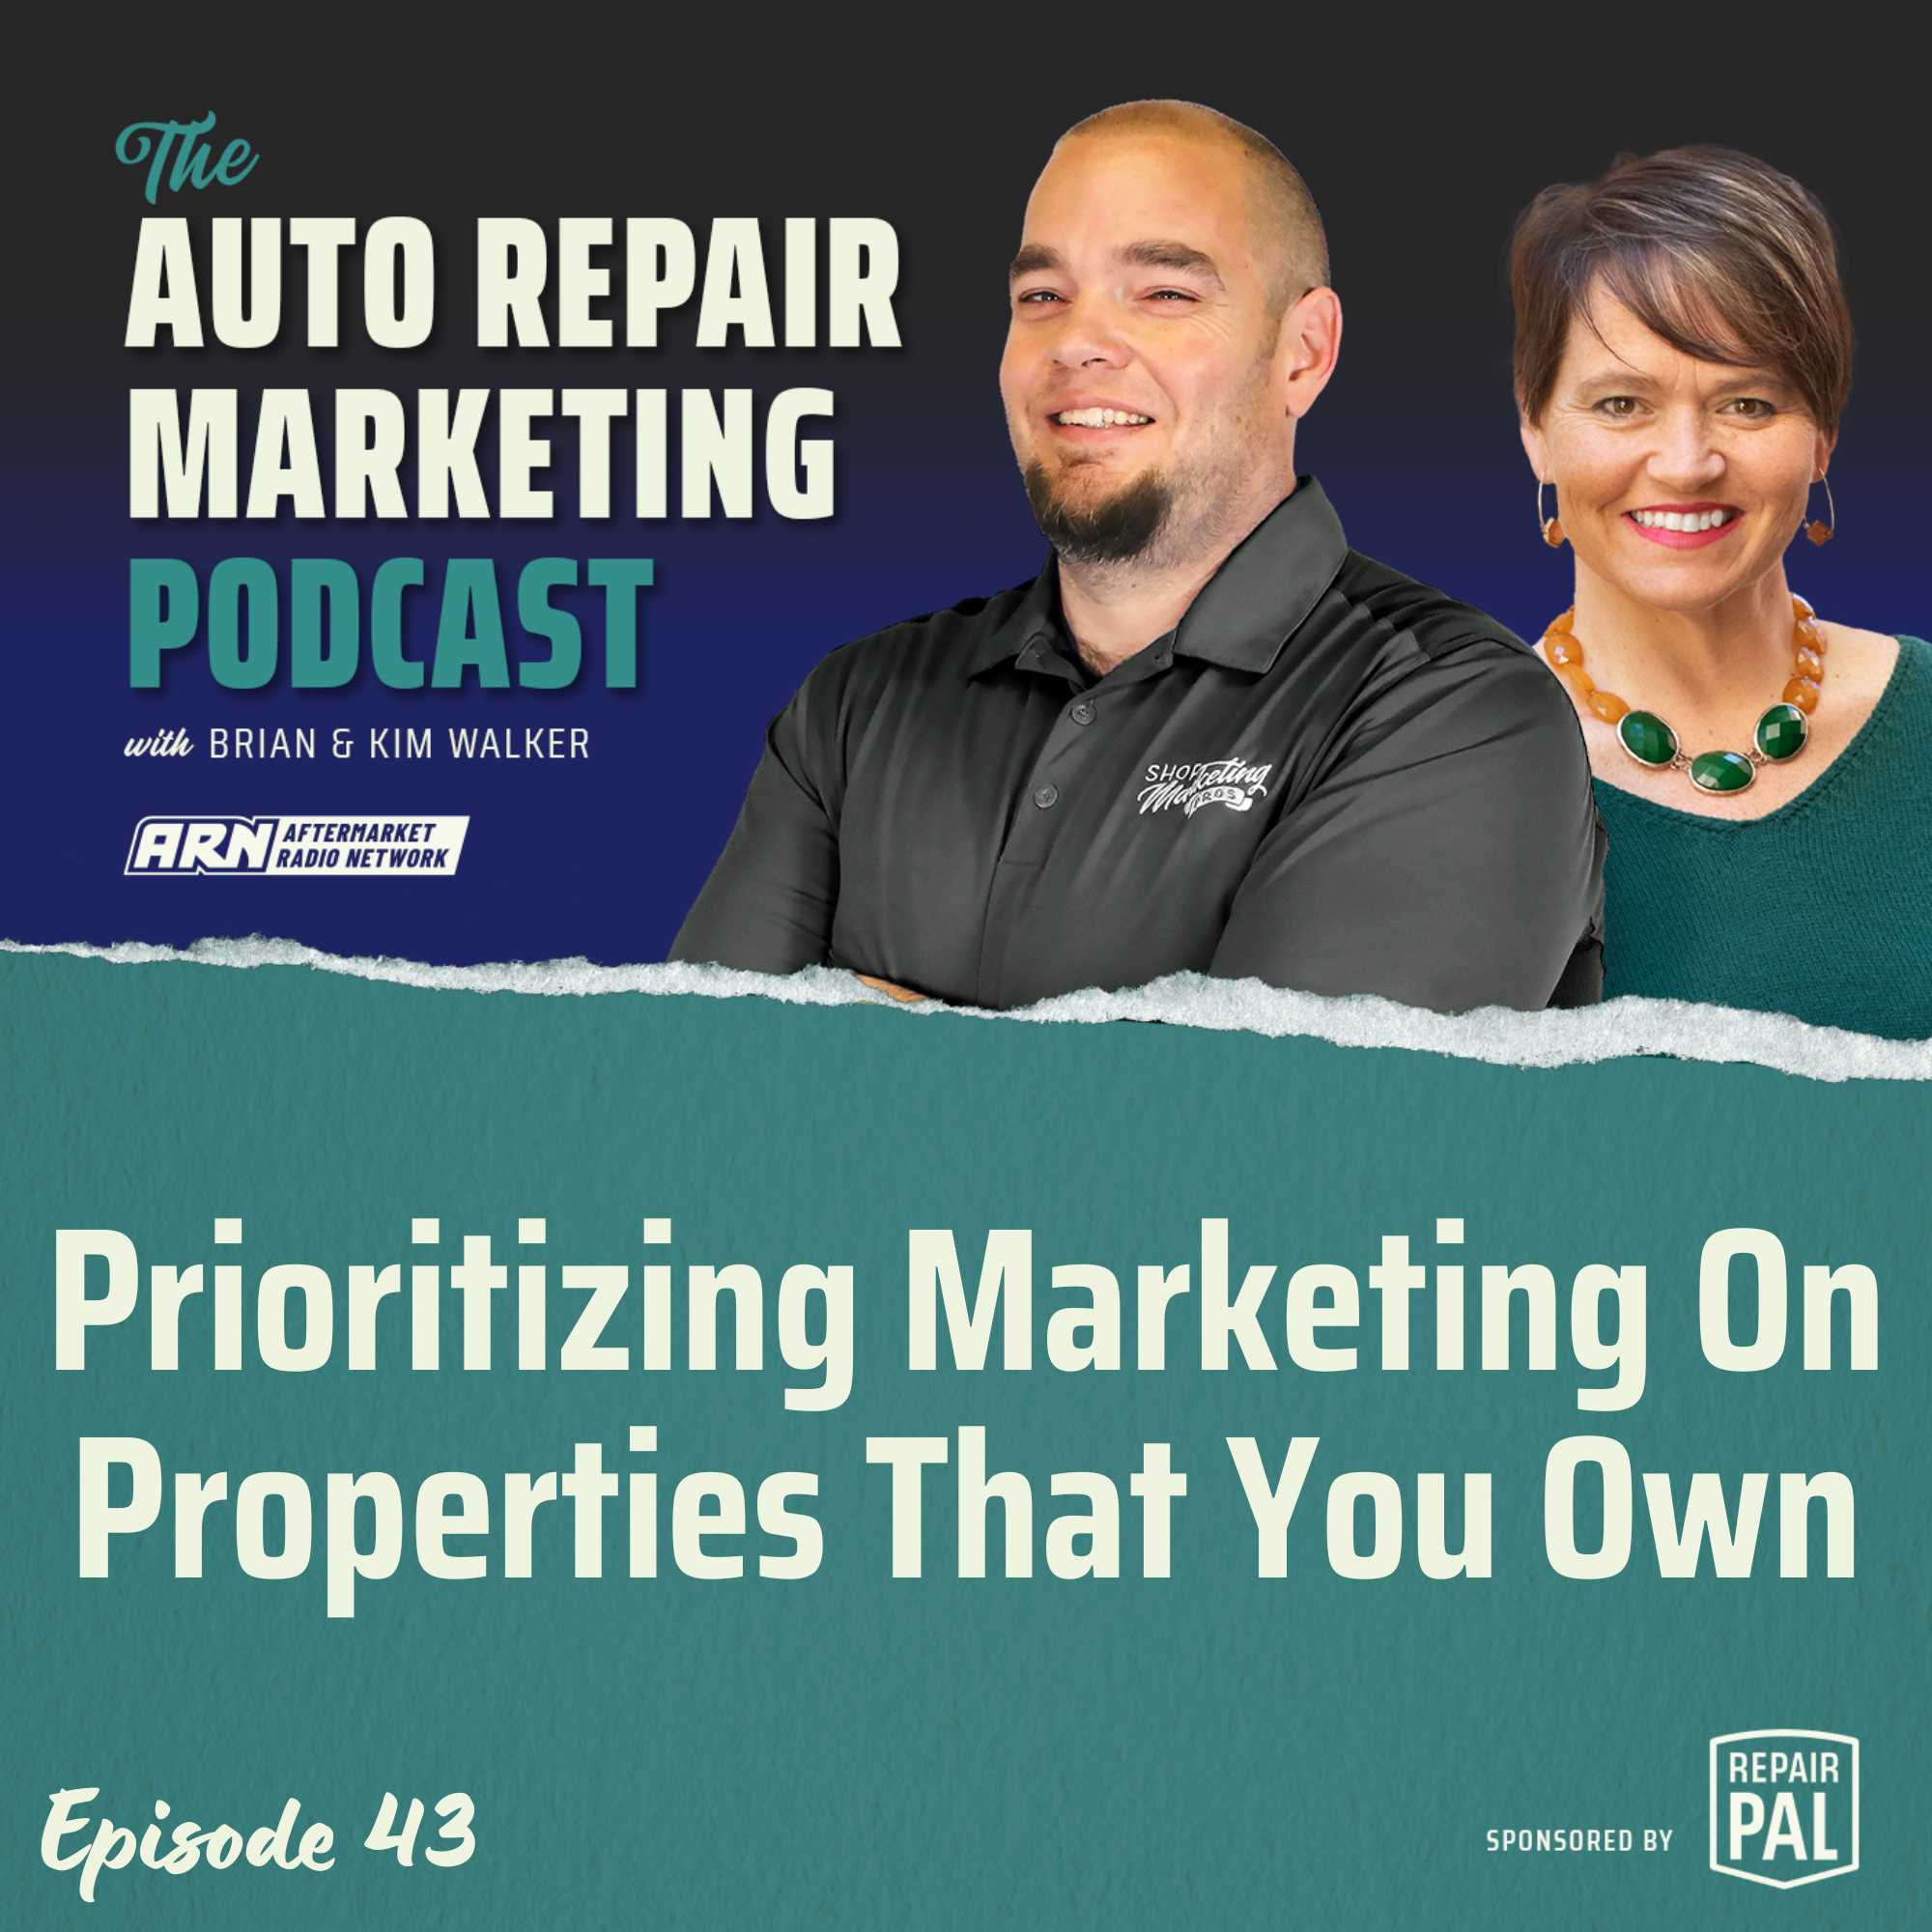 The Auto Repair Marketing Podcast Episode 43. Brian & Kim Walker talking about the topic " Prioritizing Marketing on Properties that You Own". Sponsored by Repair Pal.